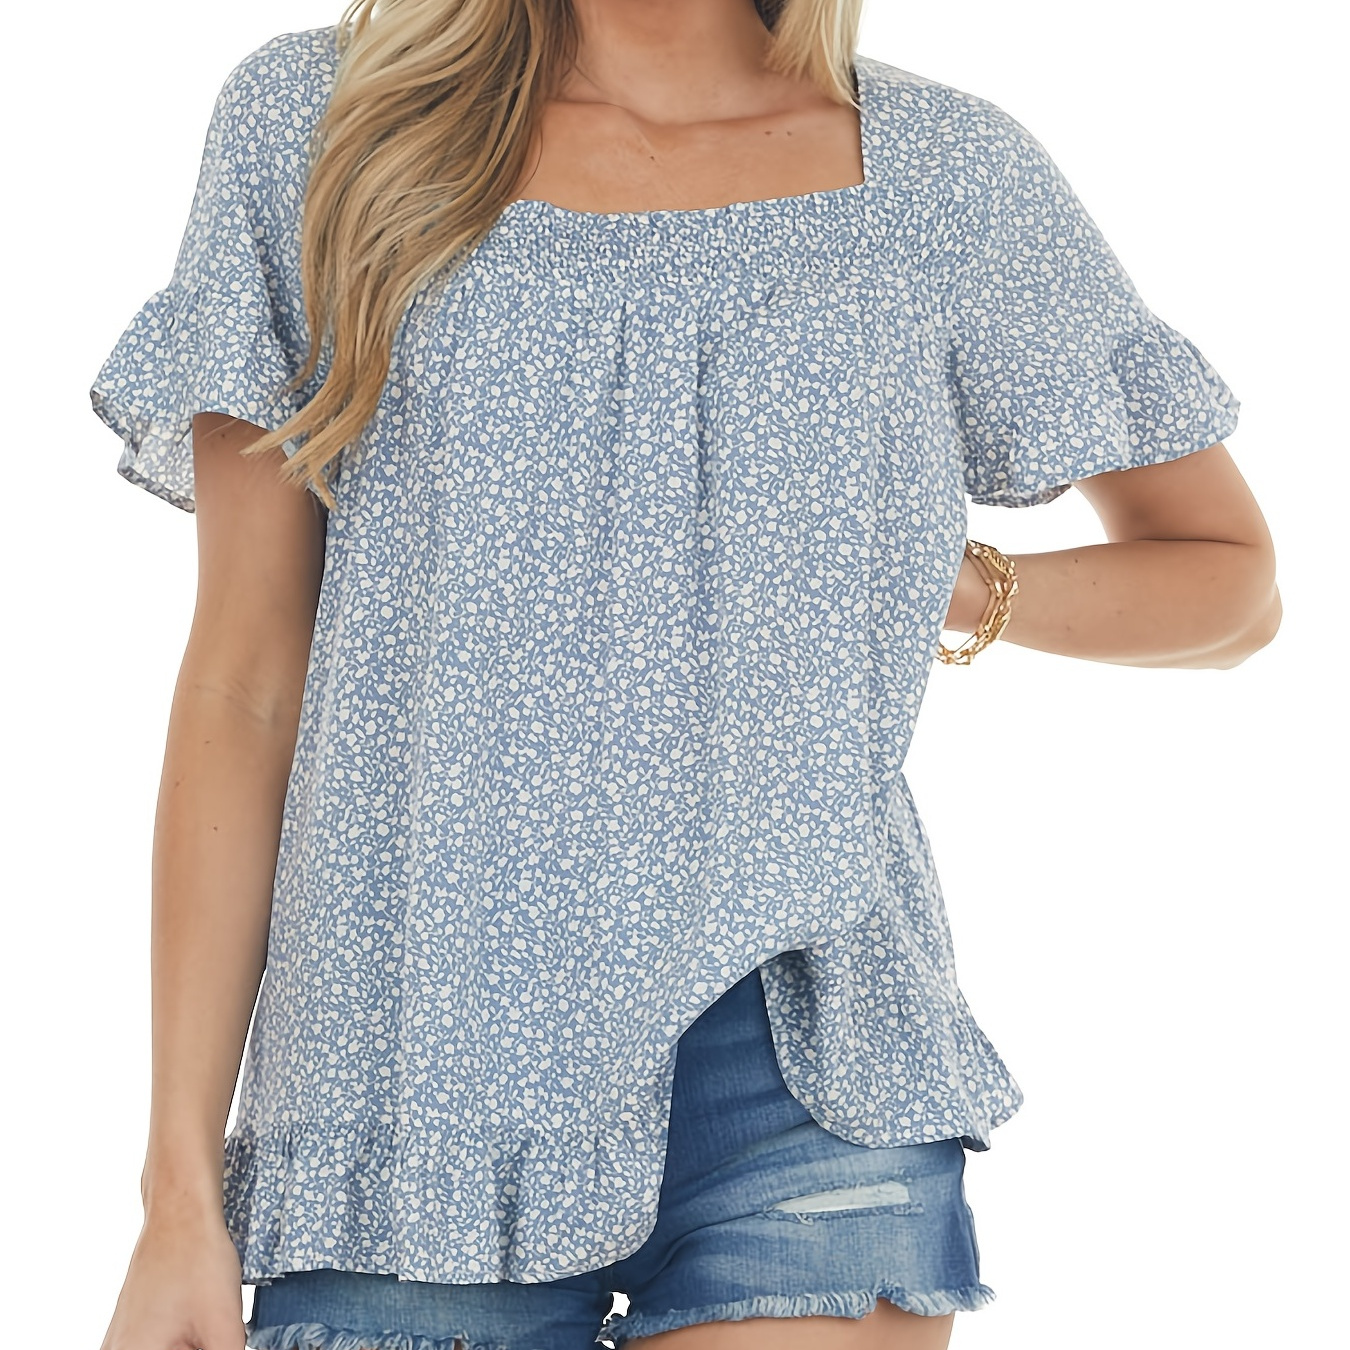 

Square Neck Babydoll Blouse, Short Sleeve Casual Top For Summer & Spring, Women's Clothing